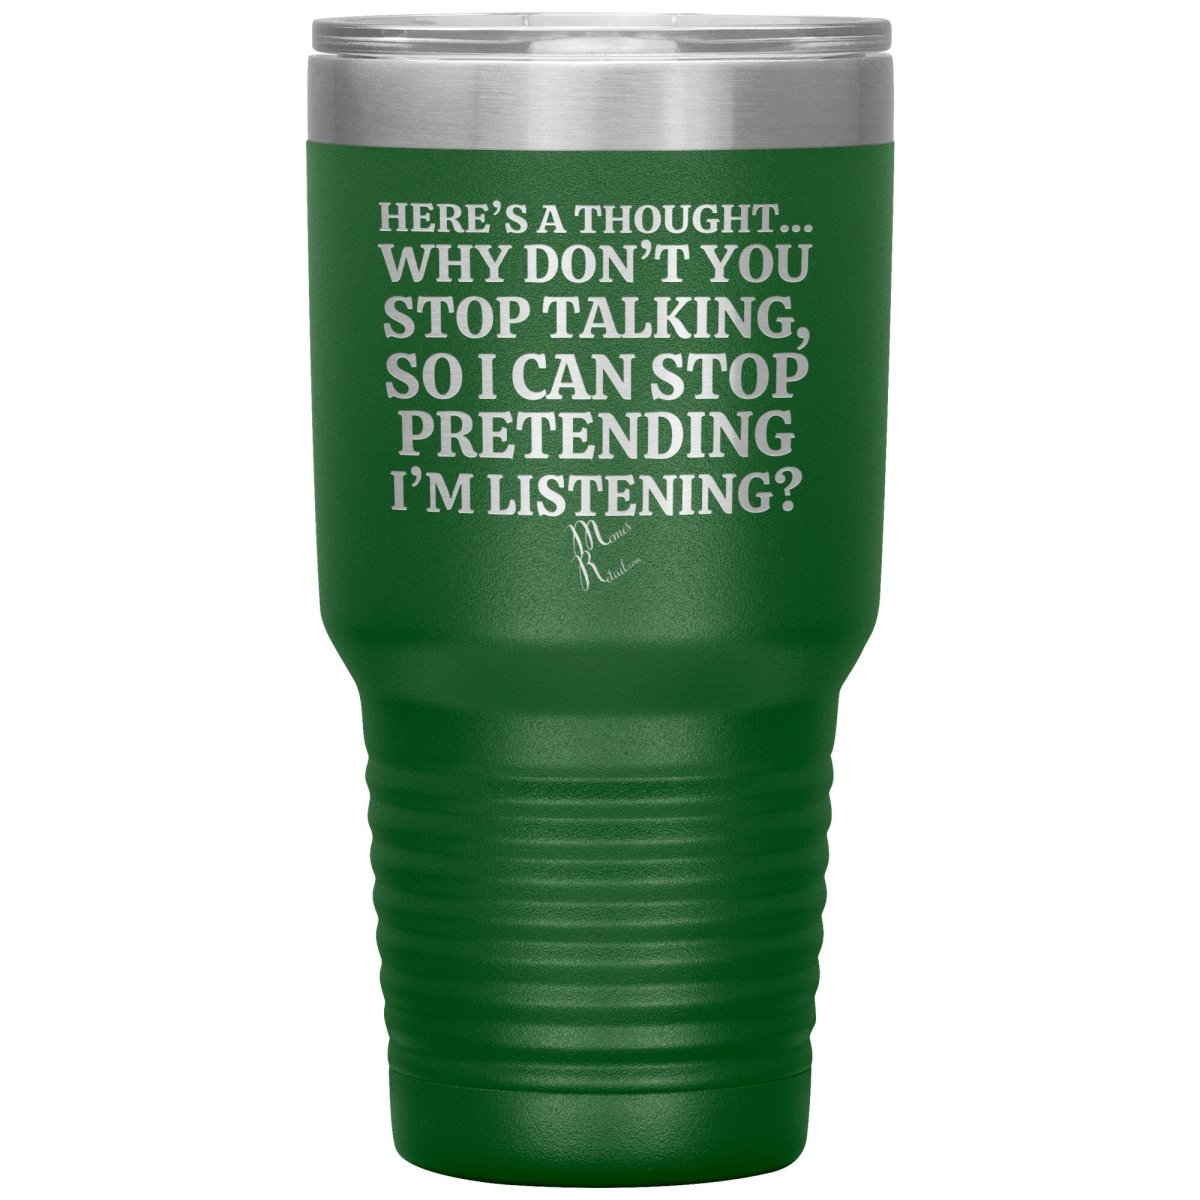 Here's A Thought...Why Don't You Stop Talking Tumblers, 30oz Insulated Tumbler / Green - MemesRetail.com